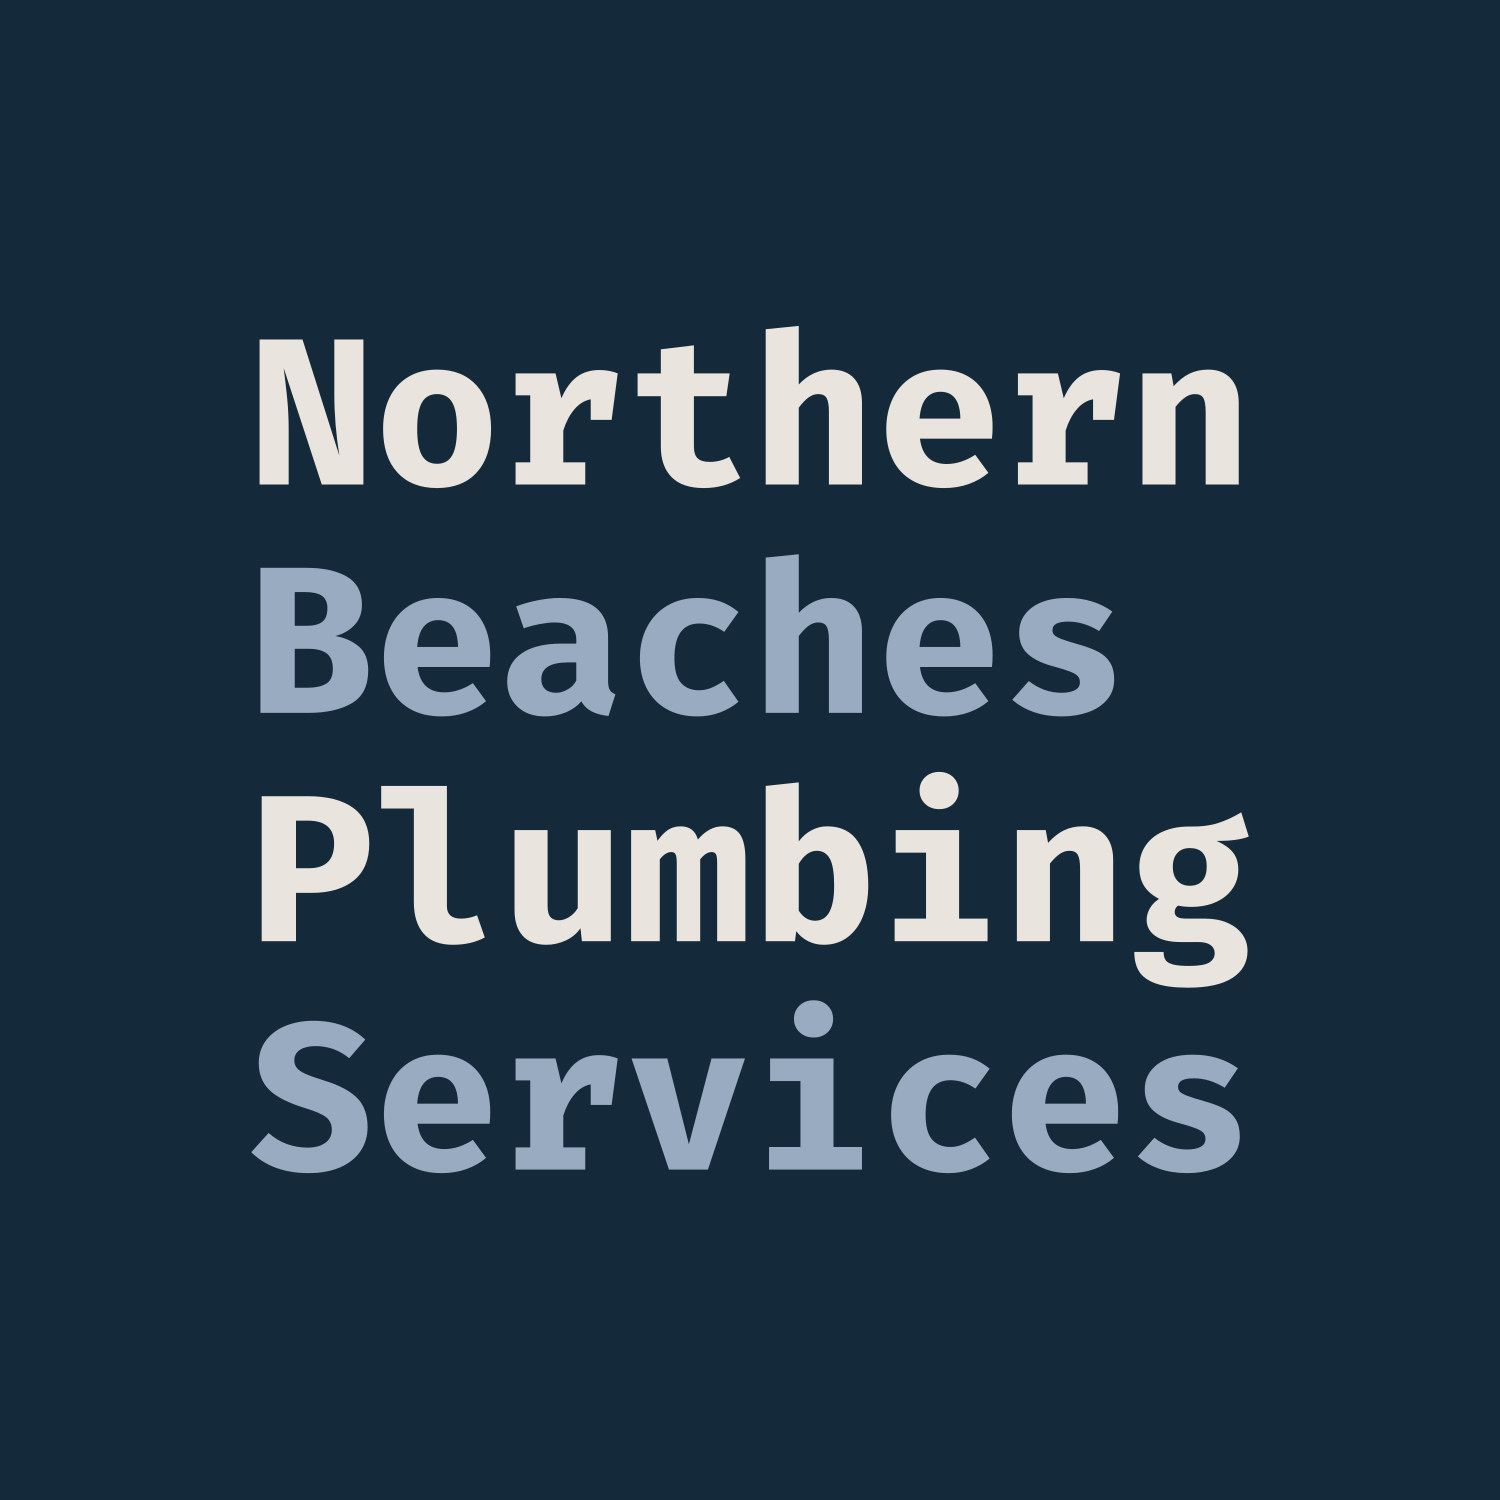 Northern Beaches Plumbing Services